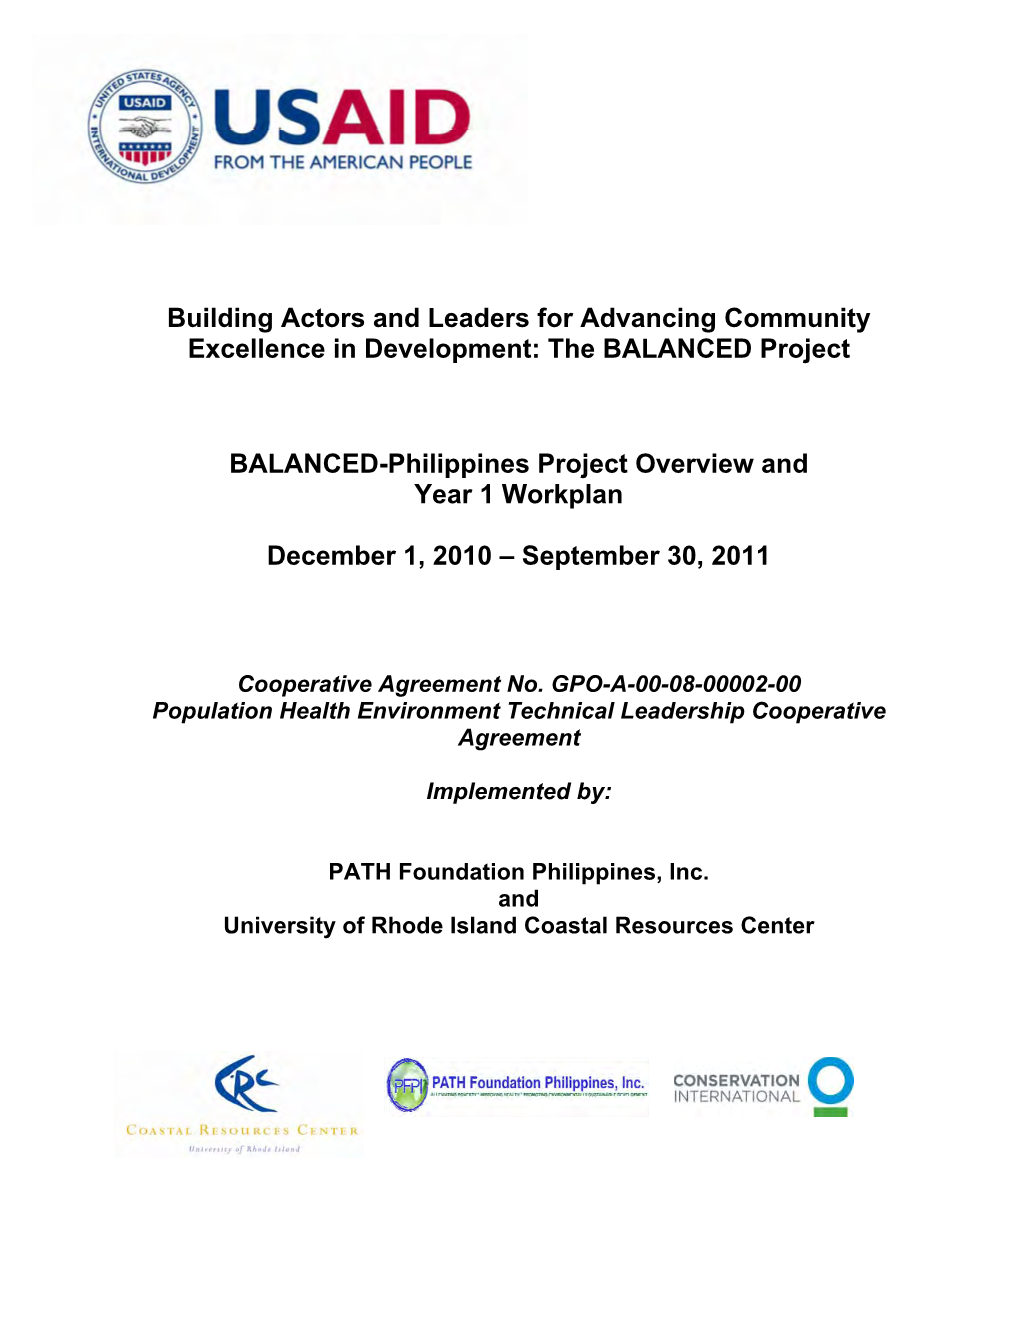 Building Actors and Leaders for Advancing Community Excellence in Development: the BALANCED Project